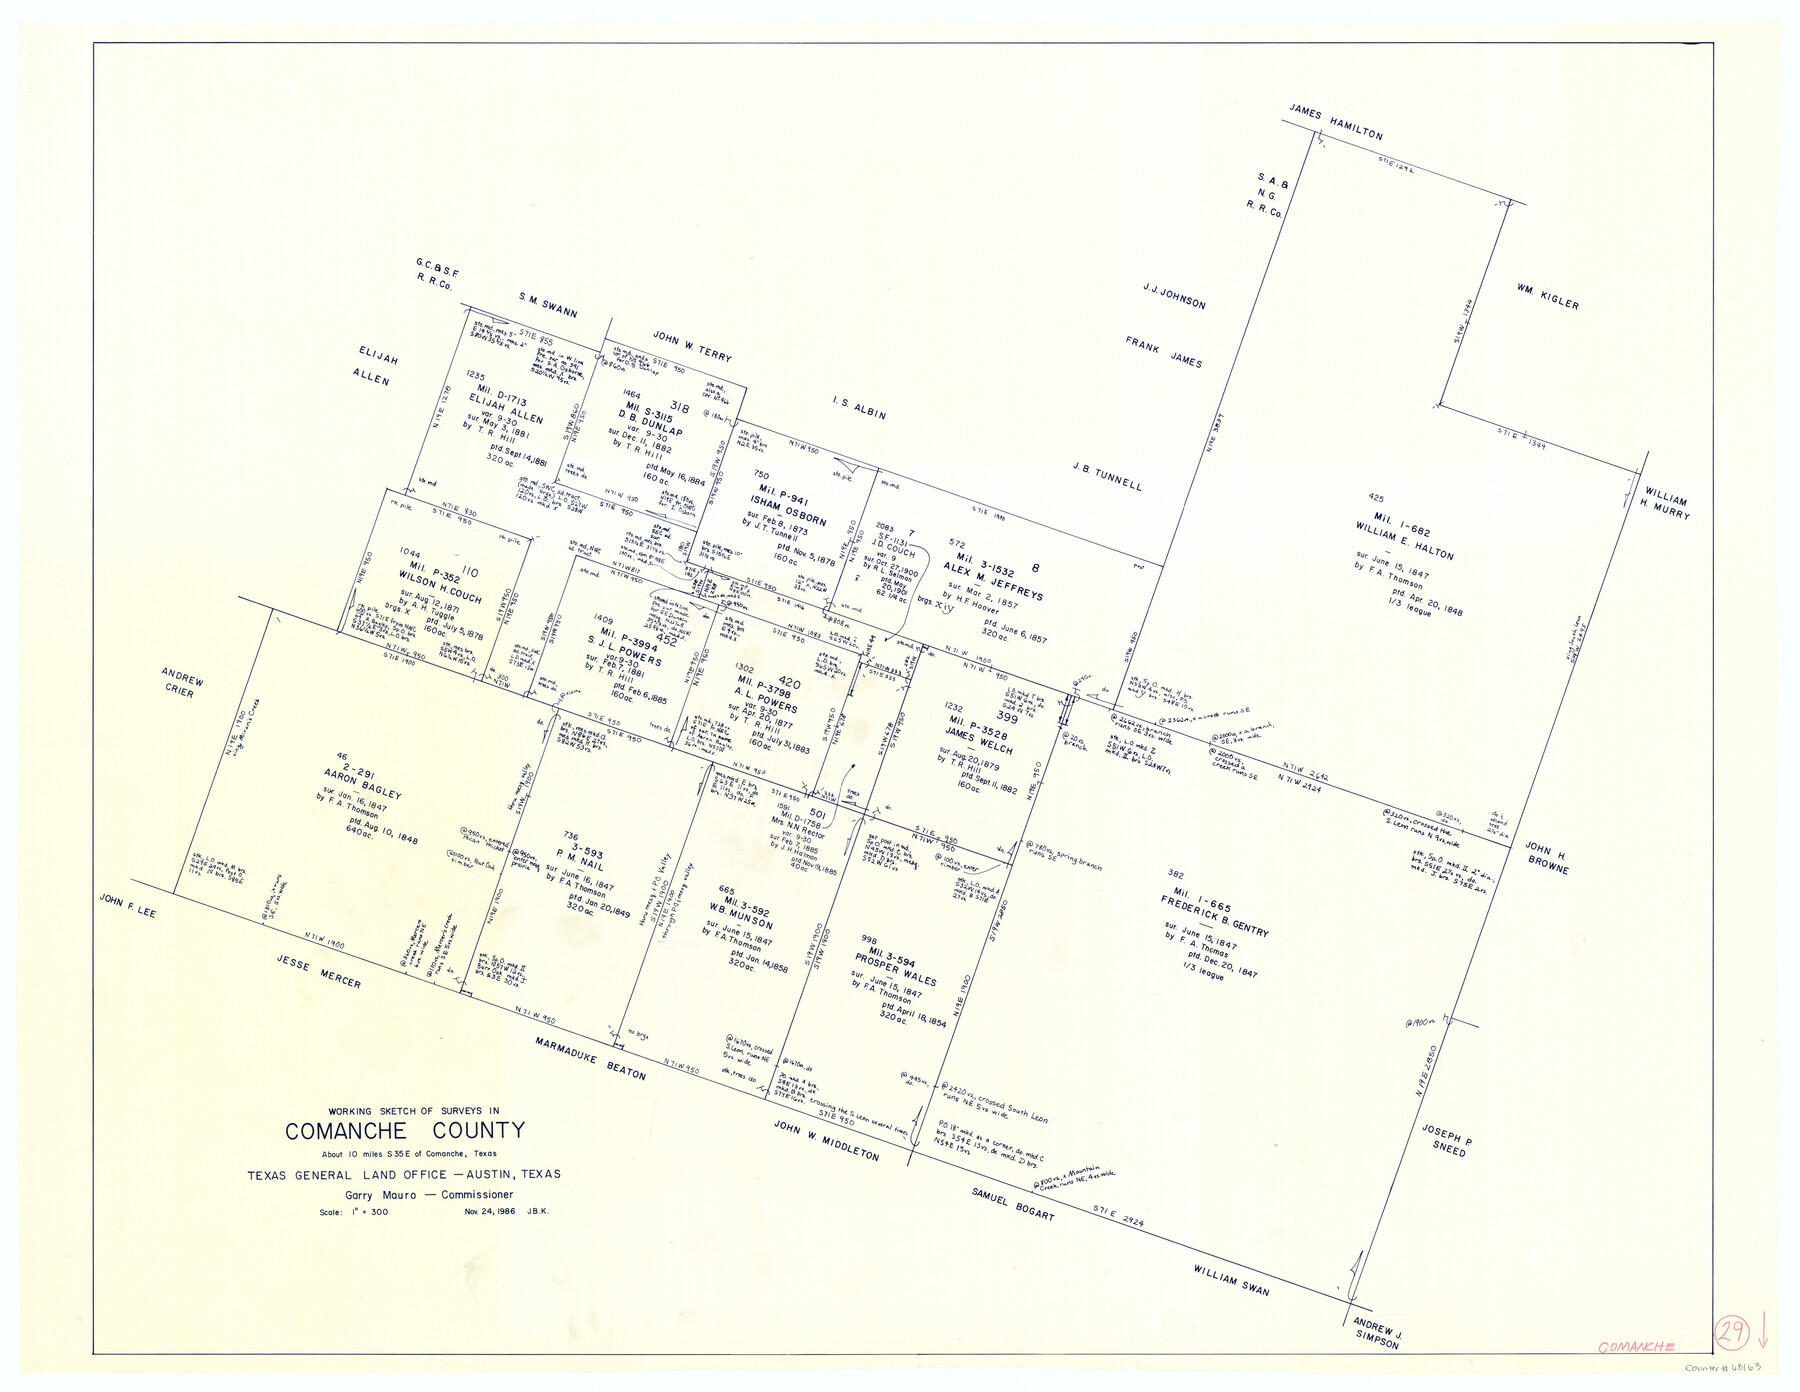 68163, Comanche County Working Sketch 29, General Map Collection